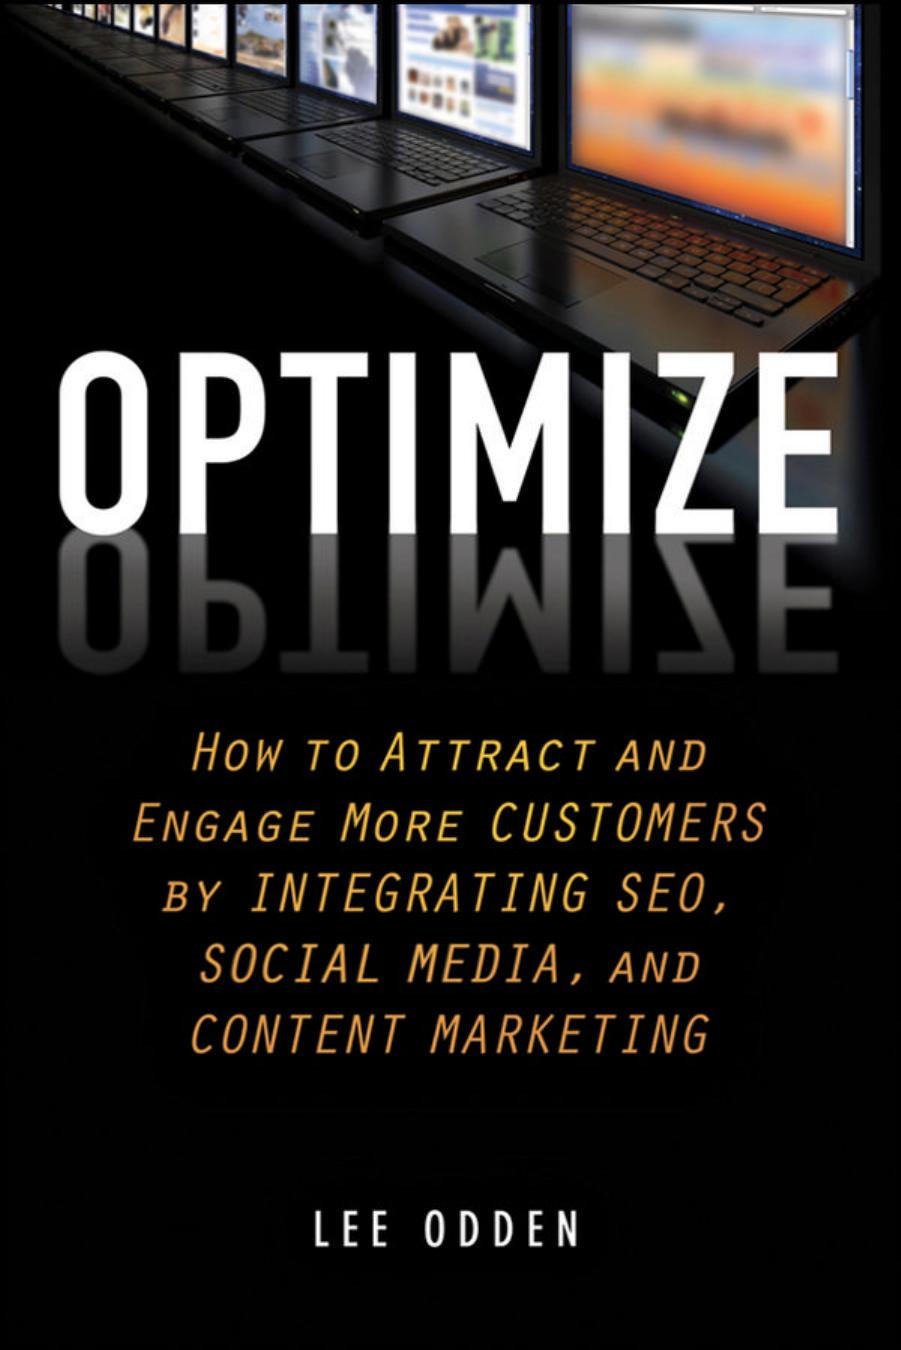 Optimize: How to Attract and Engage More Customers by Integrating SEO, Social Media, and Content Marketing by Lee Odden